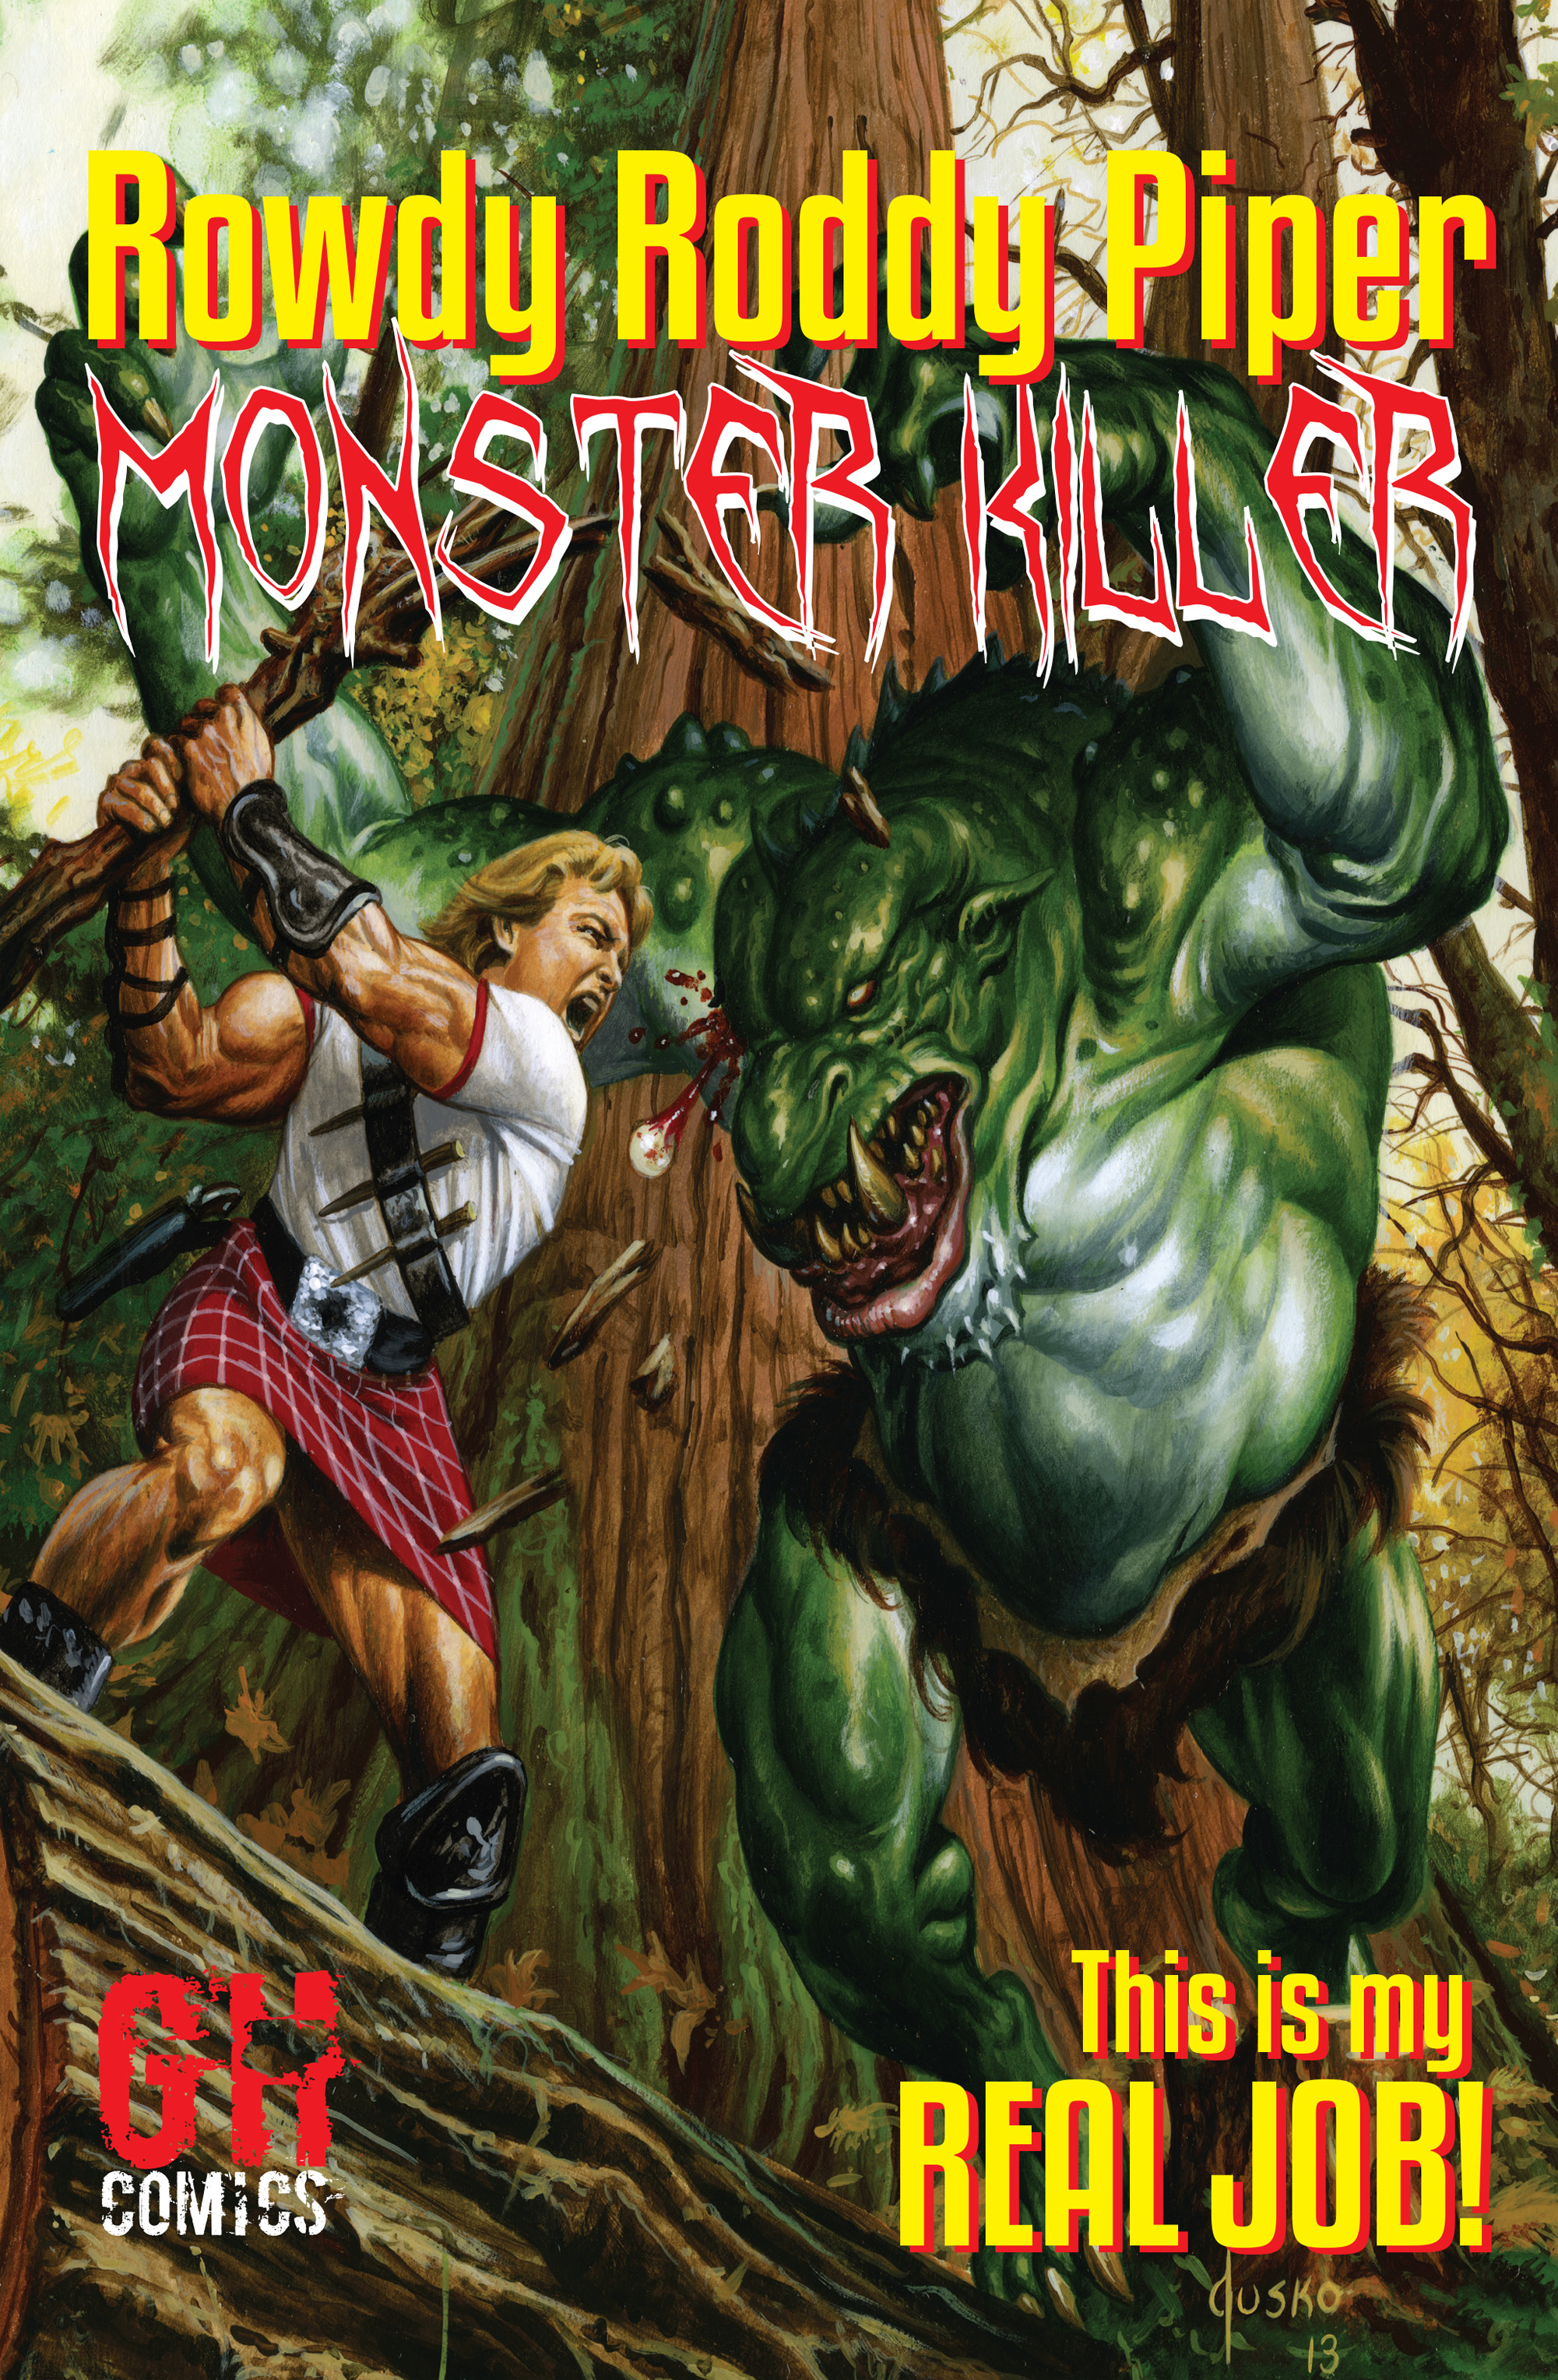 Read online Rowdy Roddy Piper: Monster Killer comic -  Issue # TPB - 1